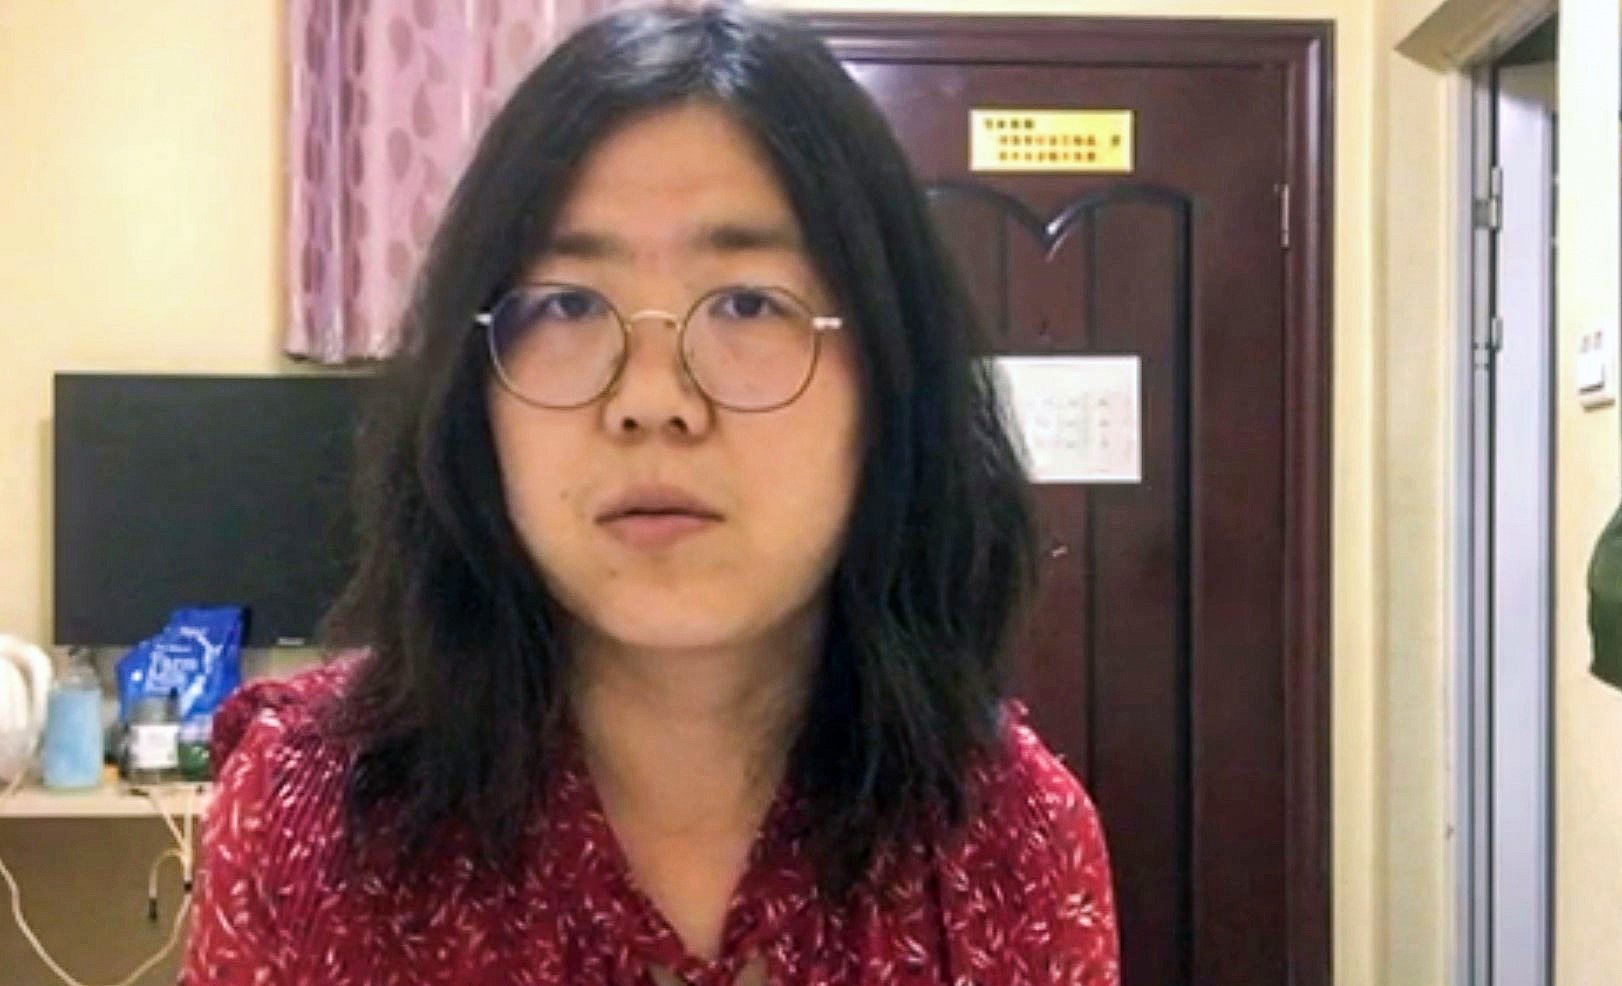 Chinese citizen journalist Zhang Zhan was charged with “picking quarrels and provoking trouble” and sentenced to four years in prison. Photo: Handout